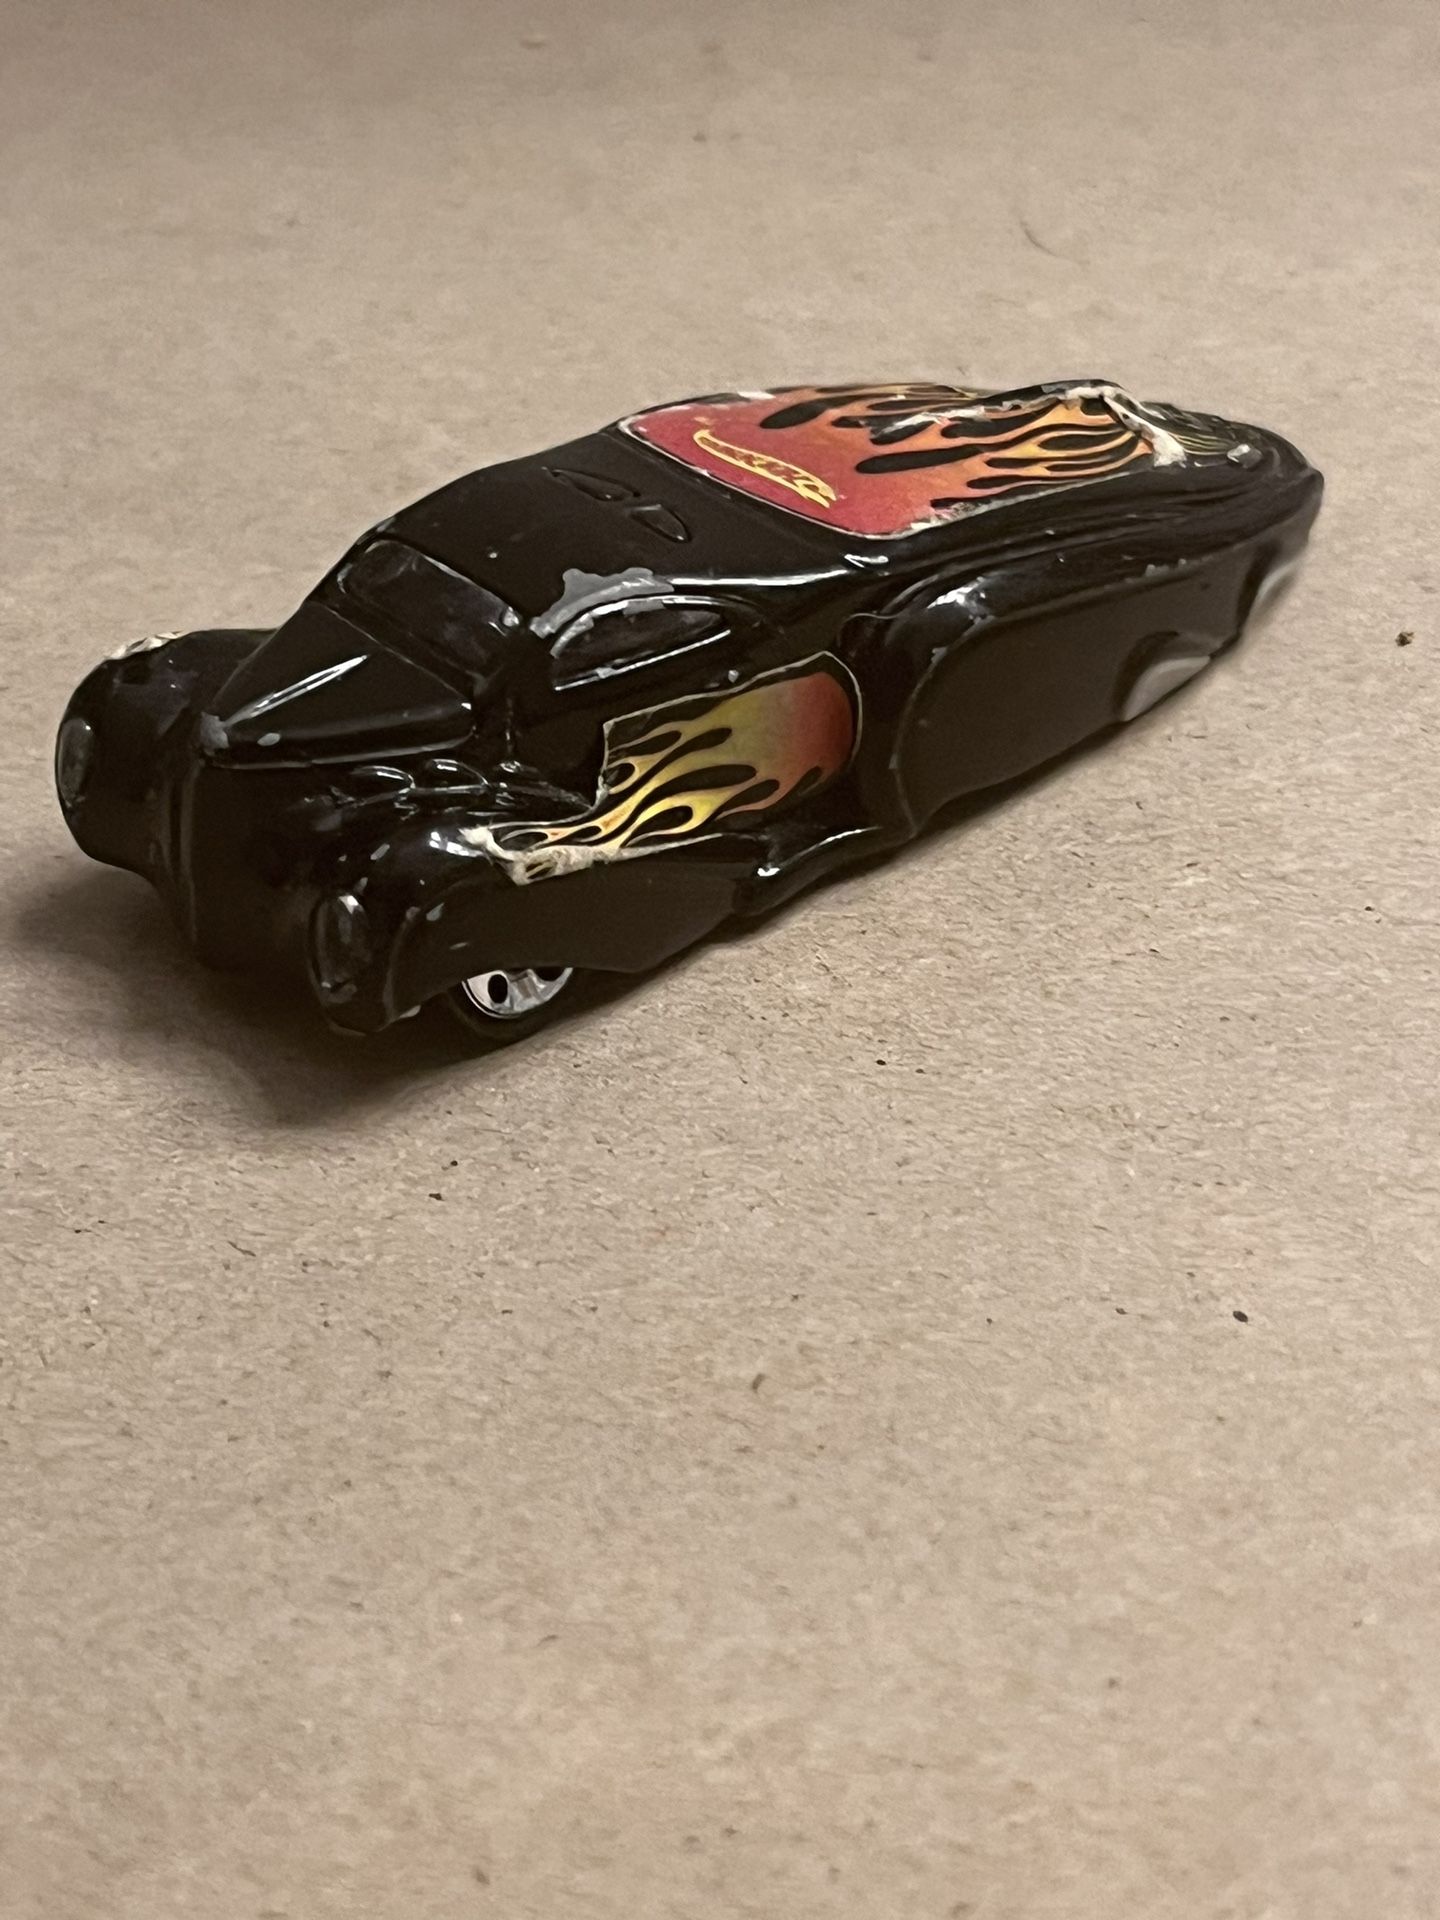 Hot Wheels Dark Red OOZ Coupe with Flame Detailing, 